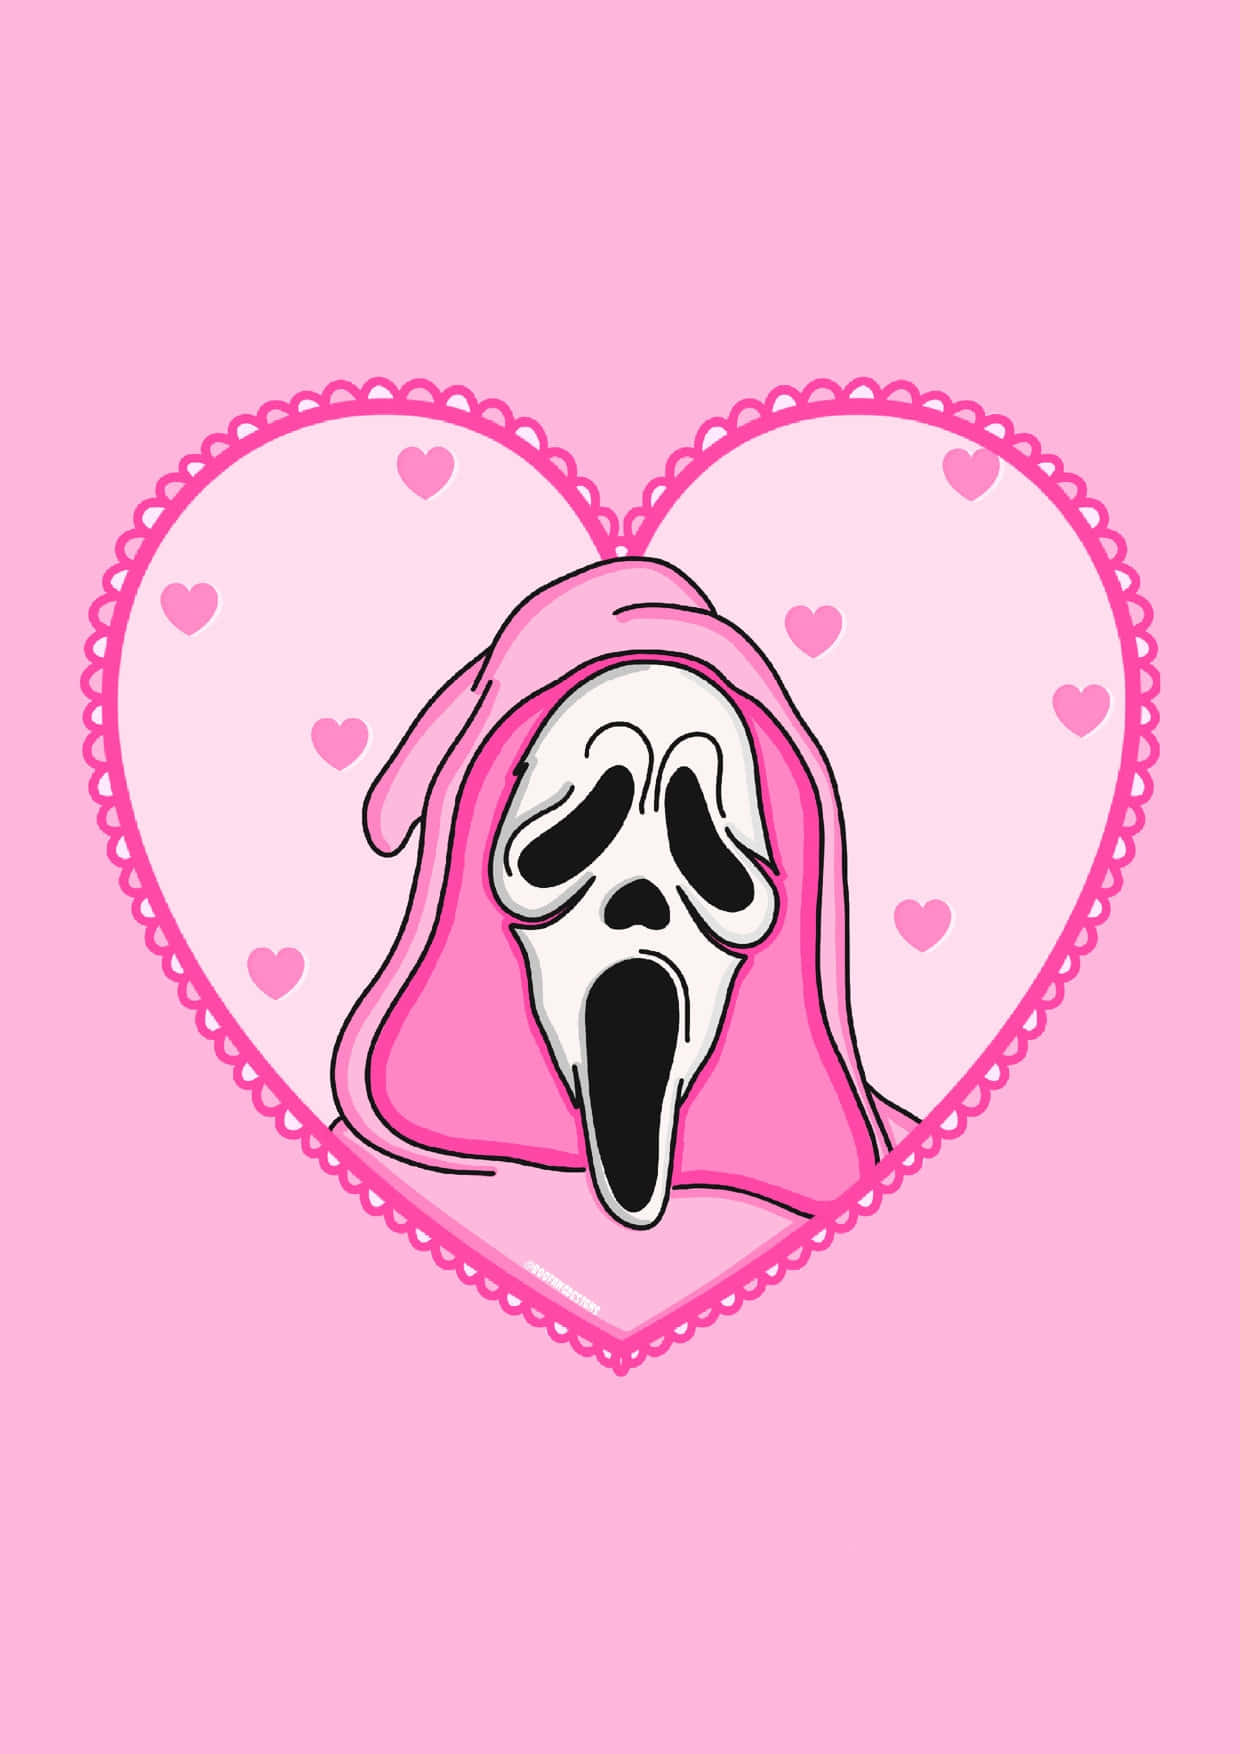 Download Cute Ghostface Pattern In Pink Background Wallpaper  Wallpapers com